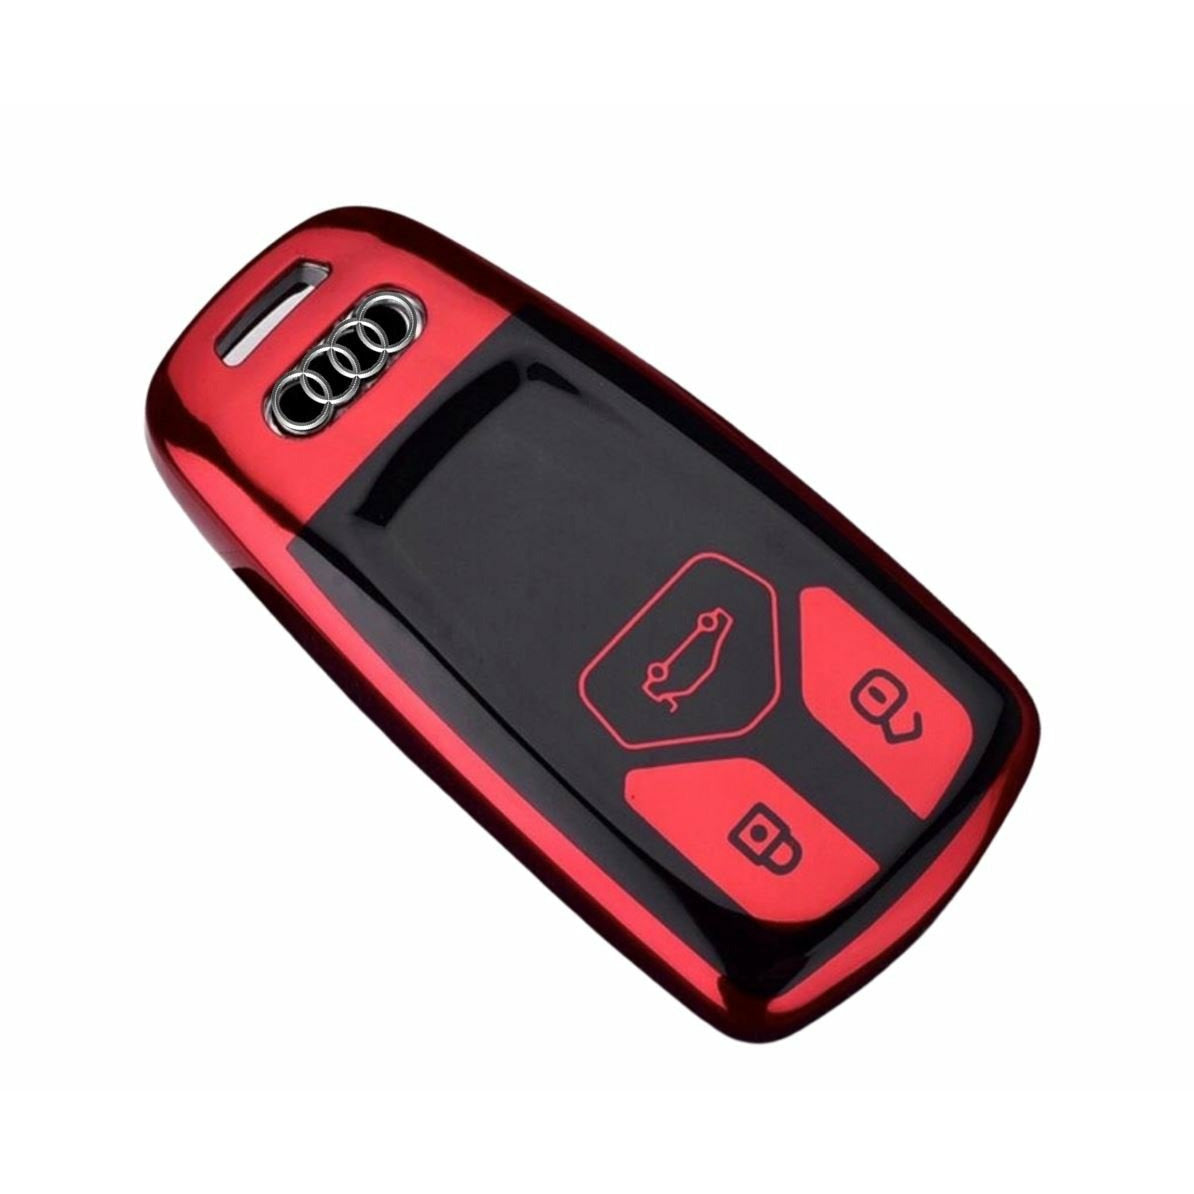 Audi key fob cover - Gloss red and black | Keysleeves